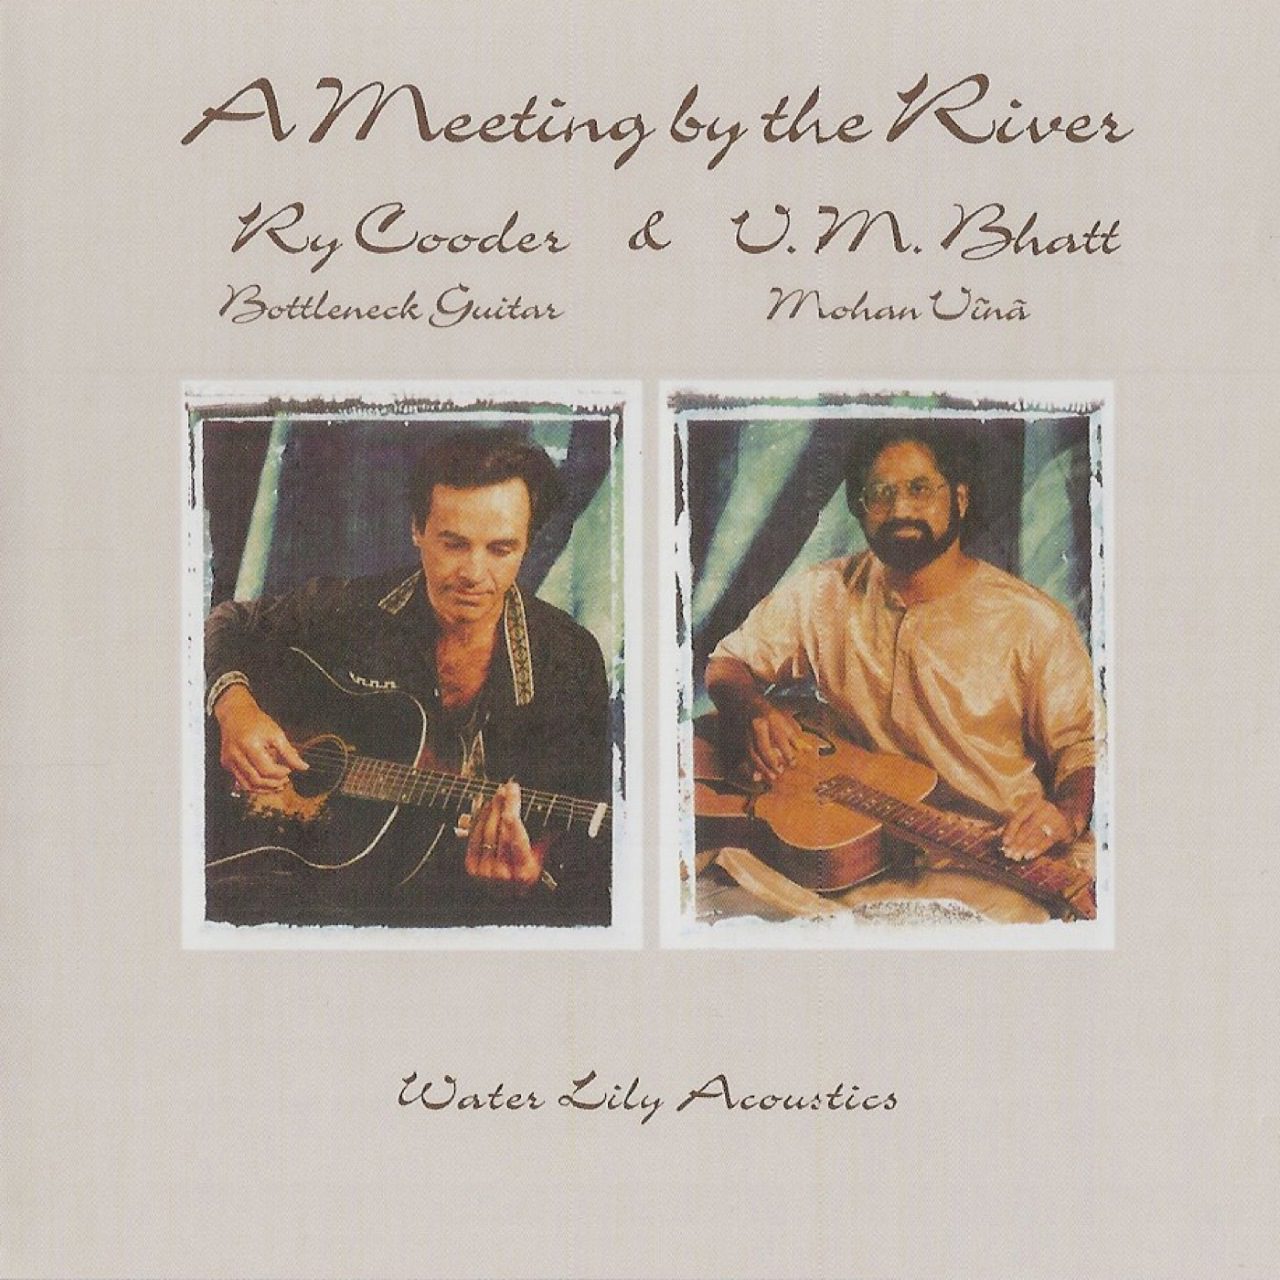 Ry Cooder & W.M. Bhatt – A Meeting By The River cover album